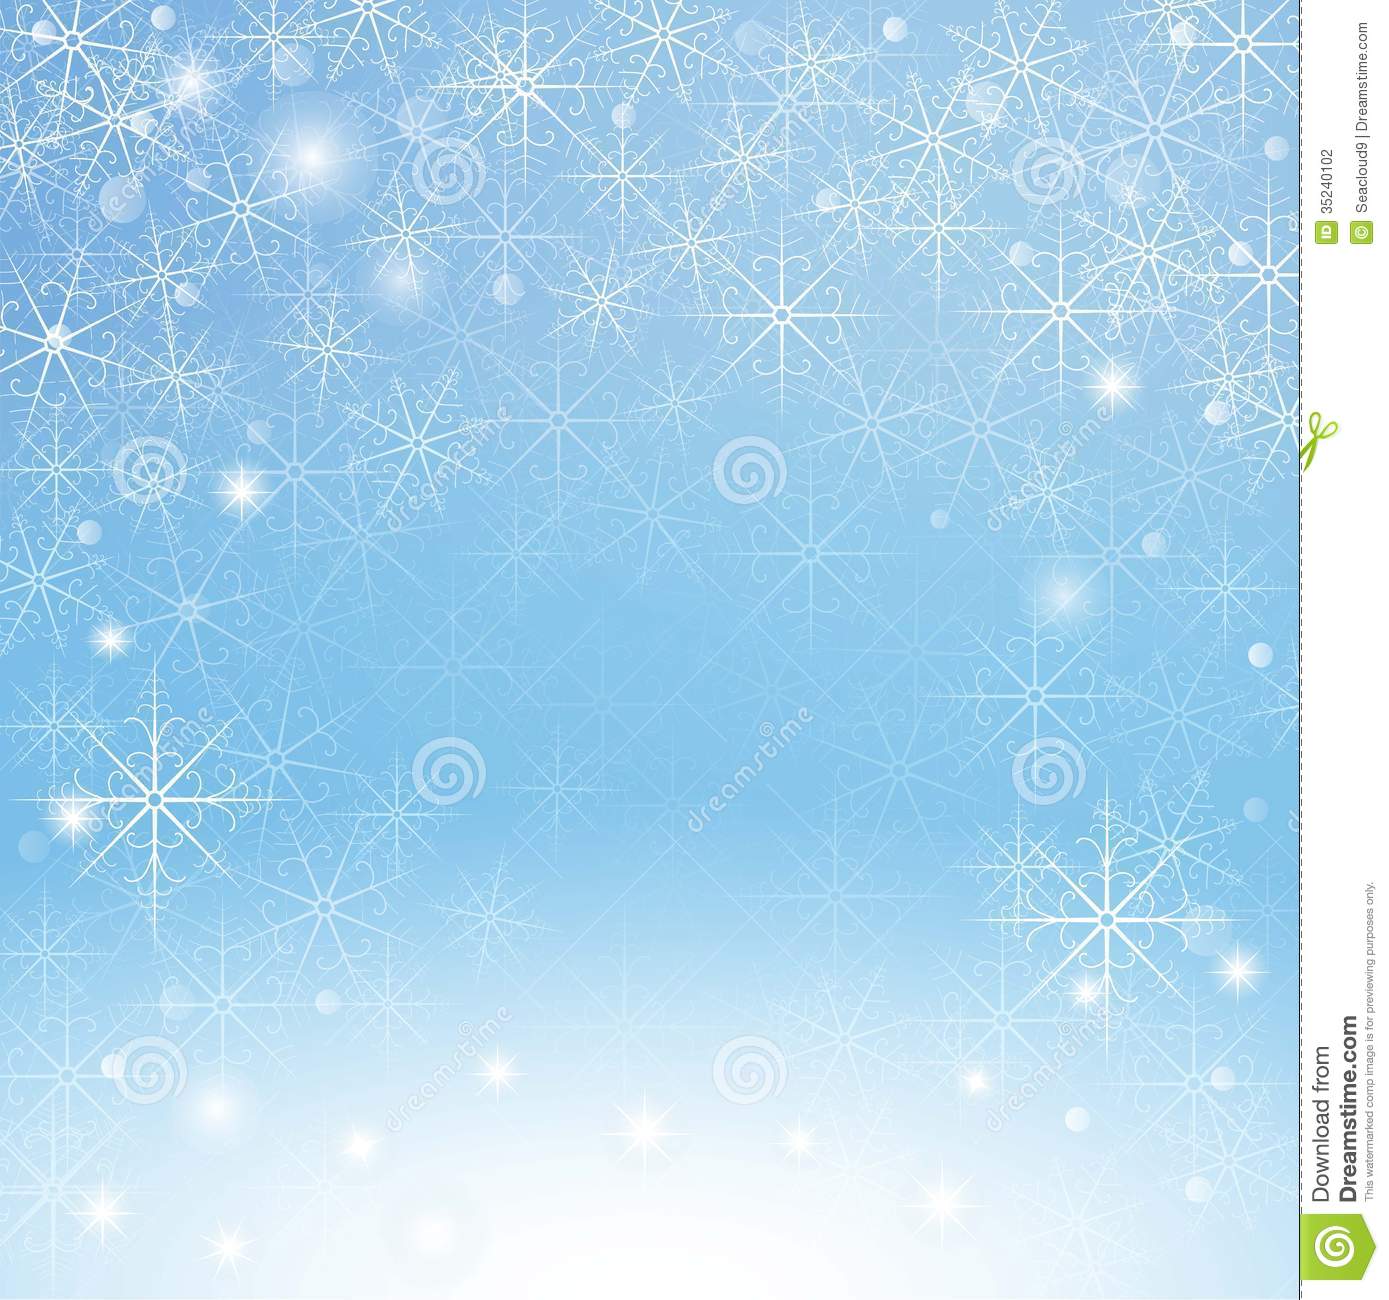 Free Vector Winter Background